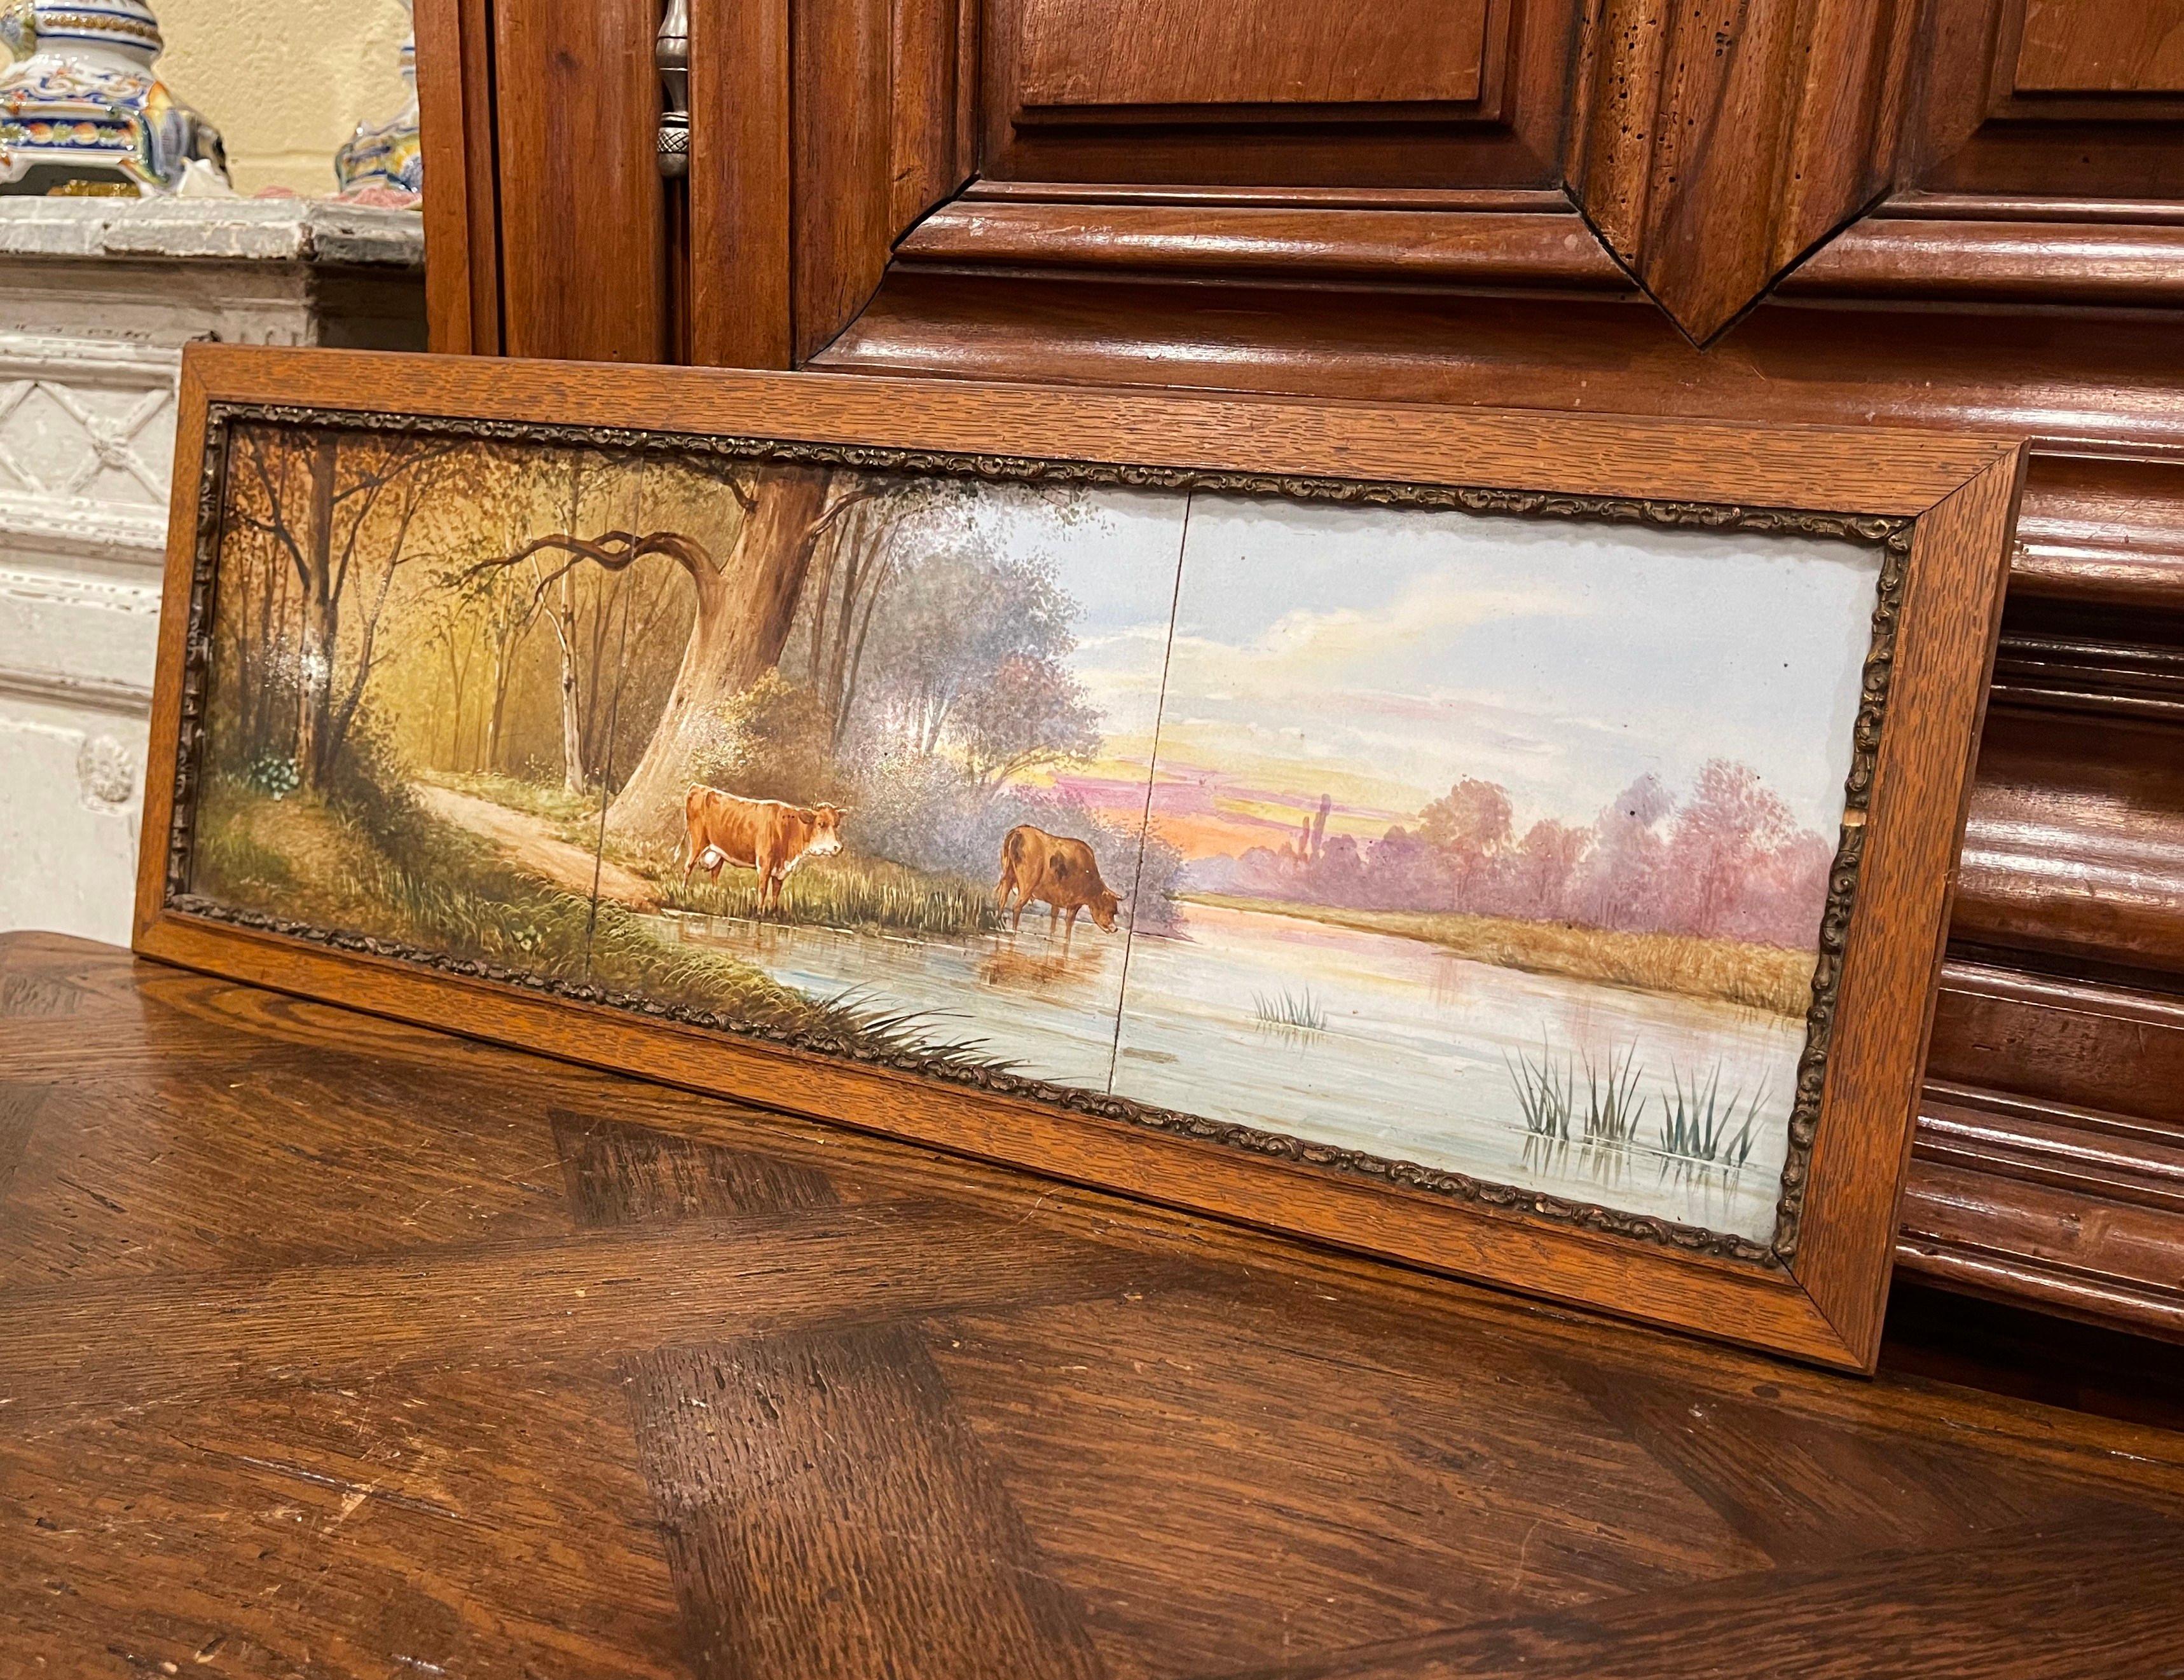 Decorate a kitchen wall with this elegant framed tile painting. Crafted in France circa 1860 and rectangular in shape, the subject matter depicts a bucolic pastoral scene at dawn with cows drinking in a river with pasture around. The three antique